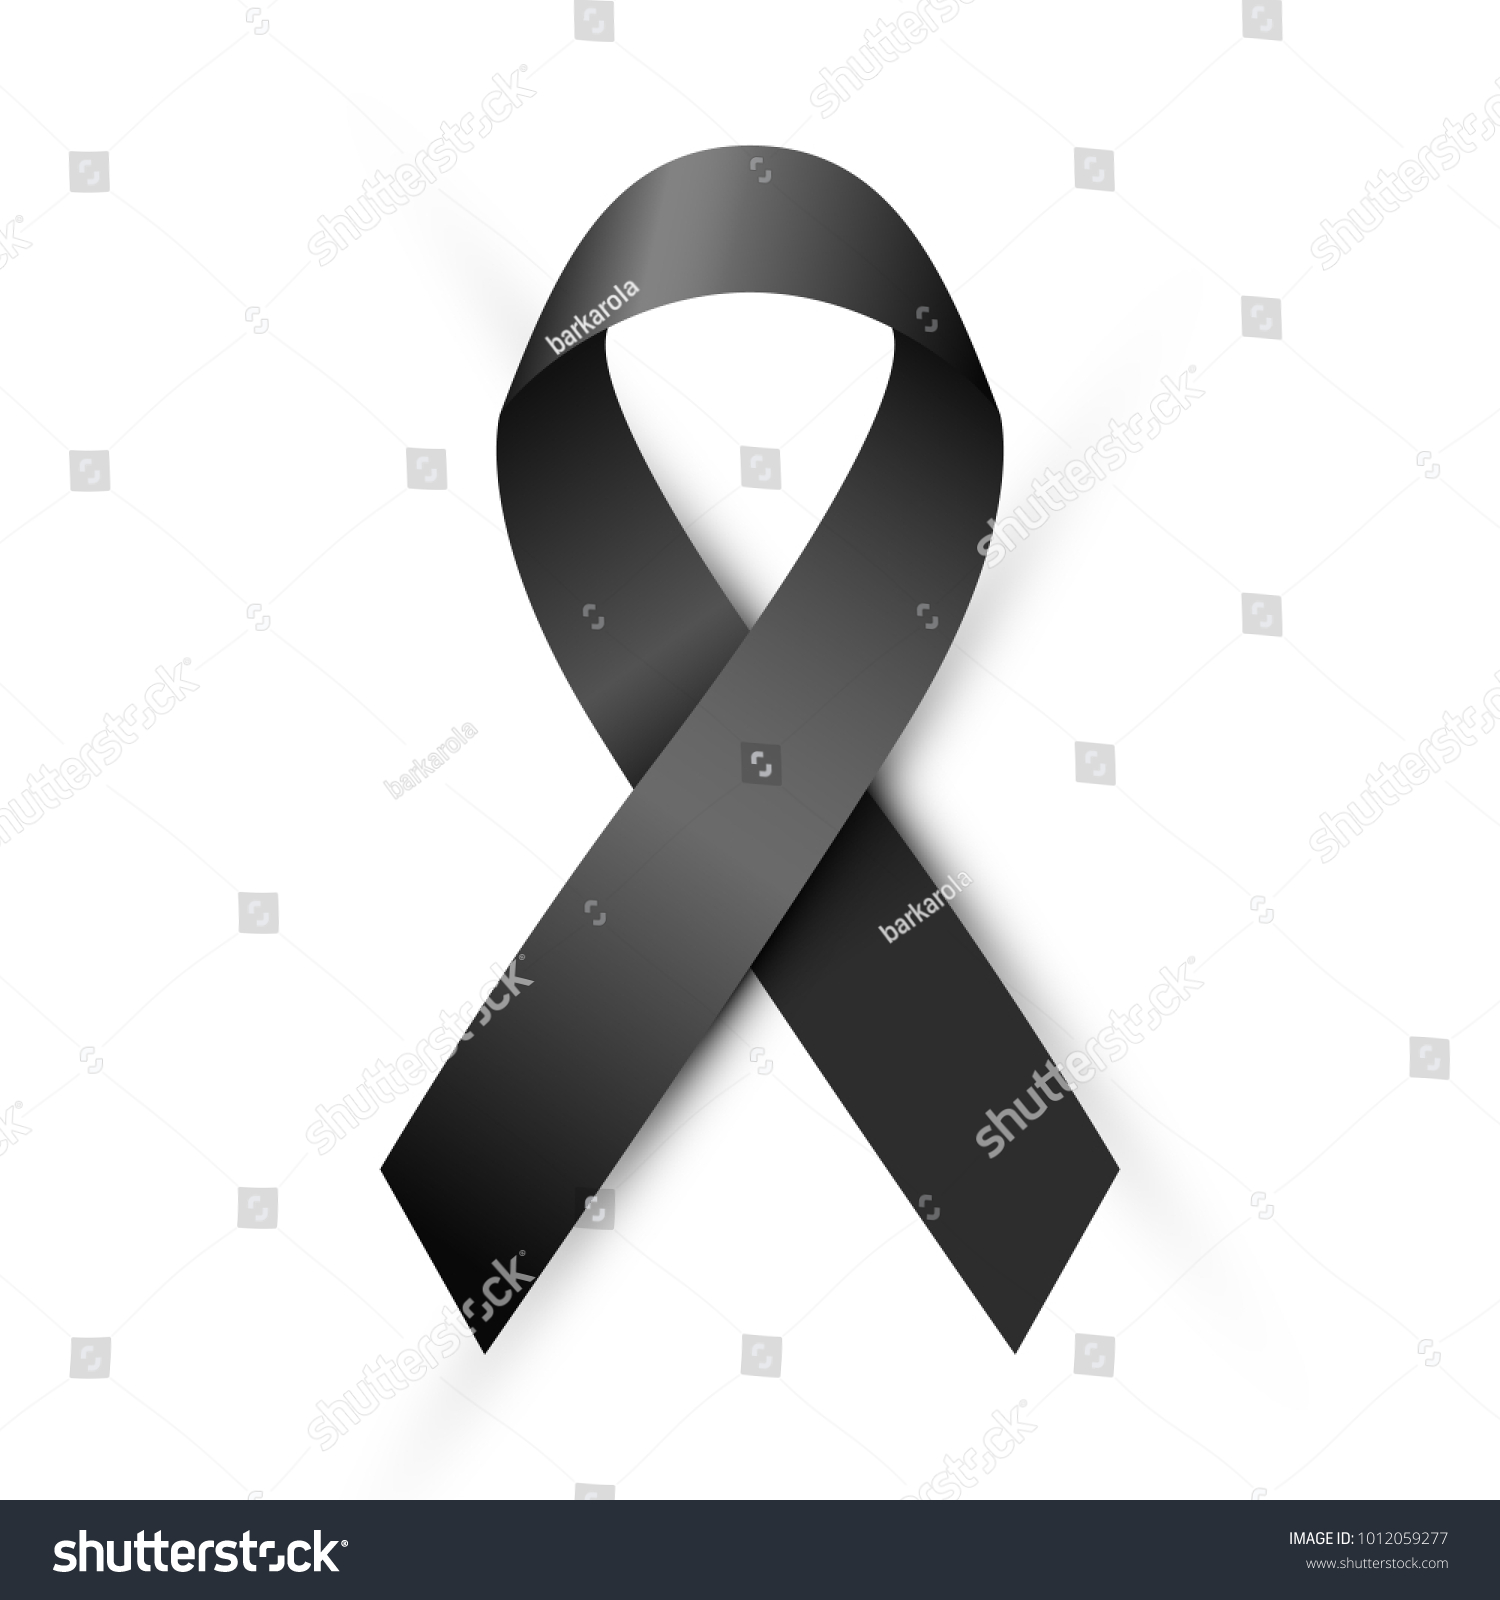 SVG of Vector illustration, Black awareness ribbon isolated on a white background. Mourning and melanoma symbol. Terrorism and death symbol.  svg